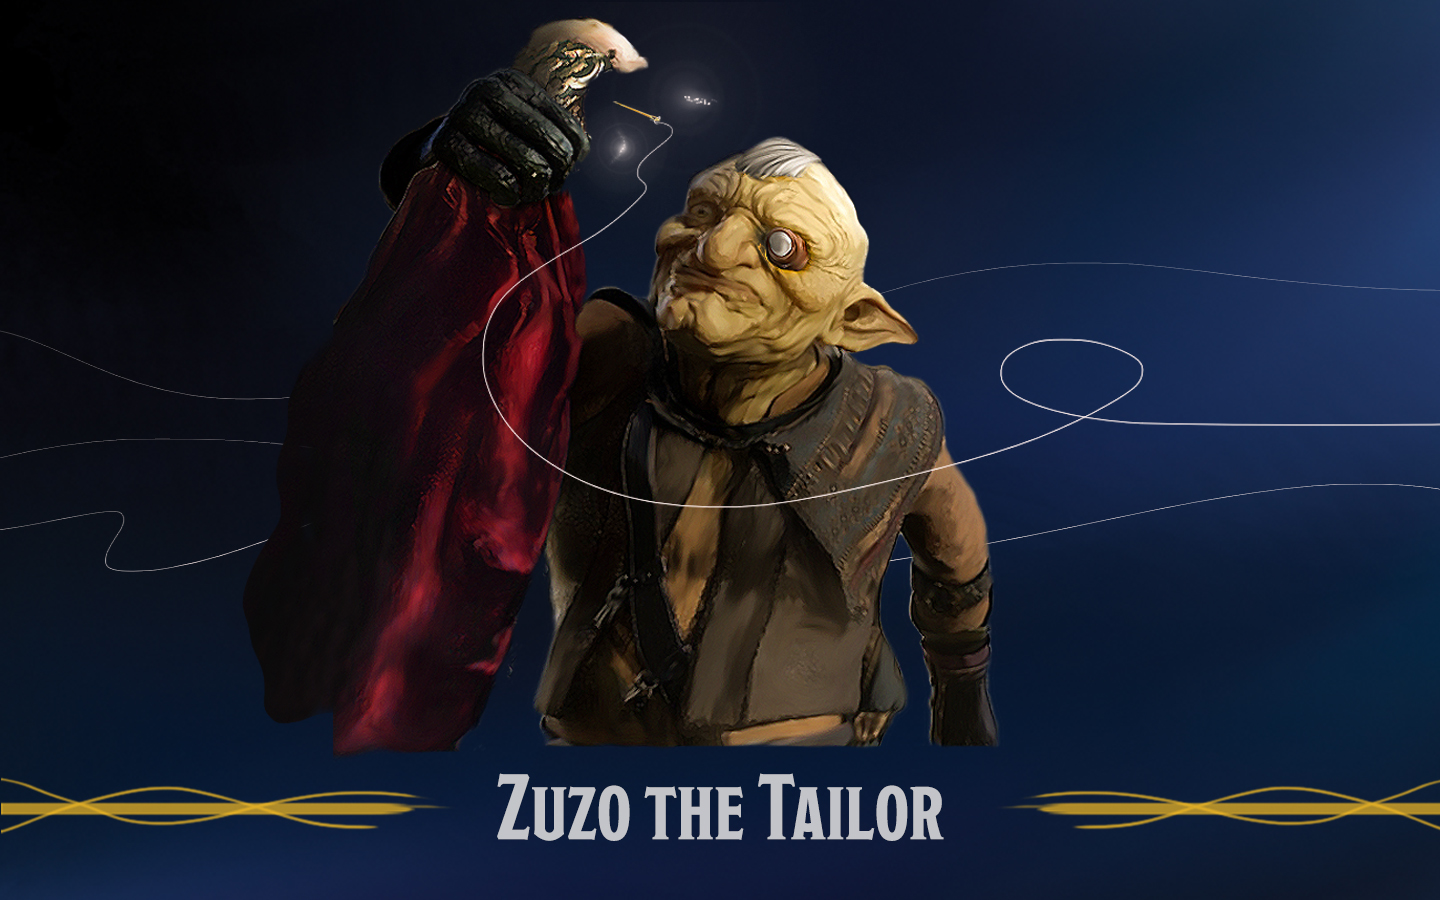 Zuzo the Tailor — A true master of his trade